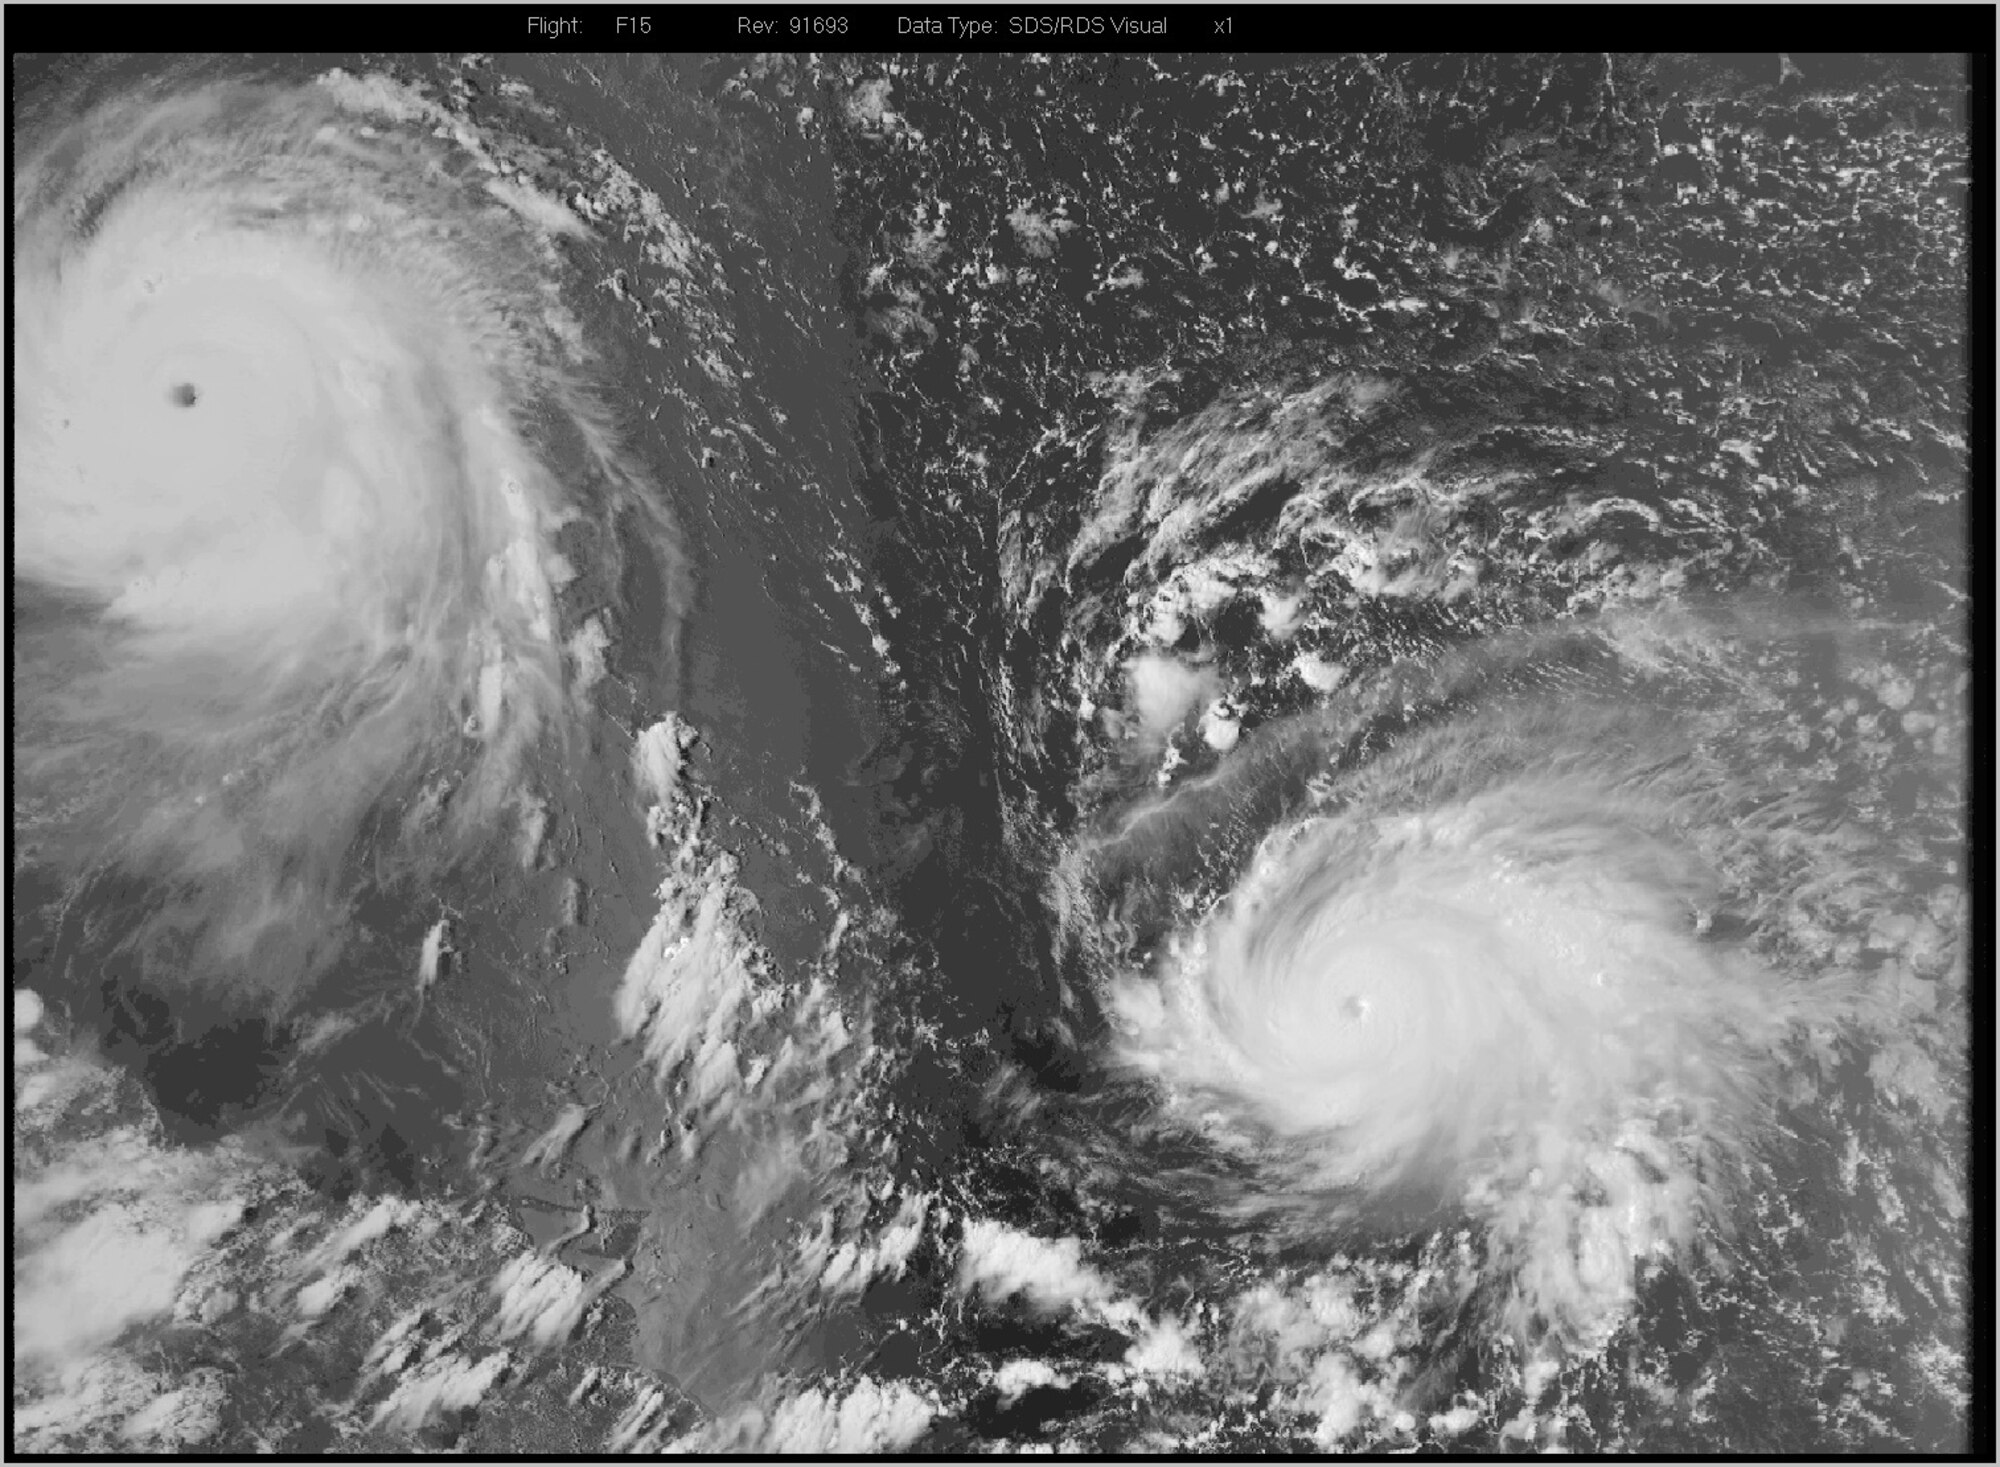 An image of Hurricanes Irma and Jose, downloaded by Reserve Citizen Airmen at the 6th Space Operations Squadron from the Defense Meteorological Satellite Program satellites on Thursday, Sep. 7, 2017.